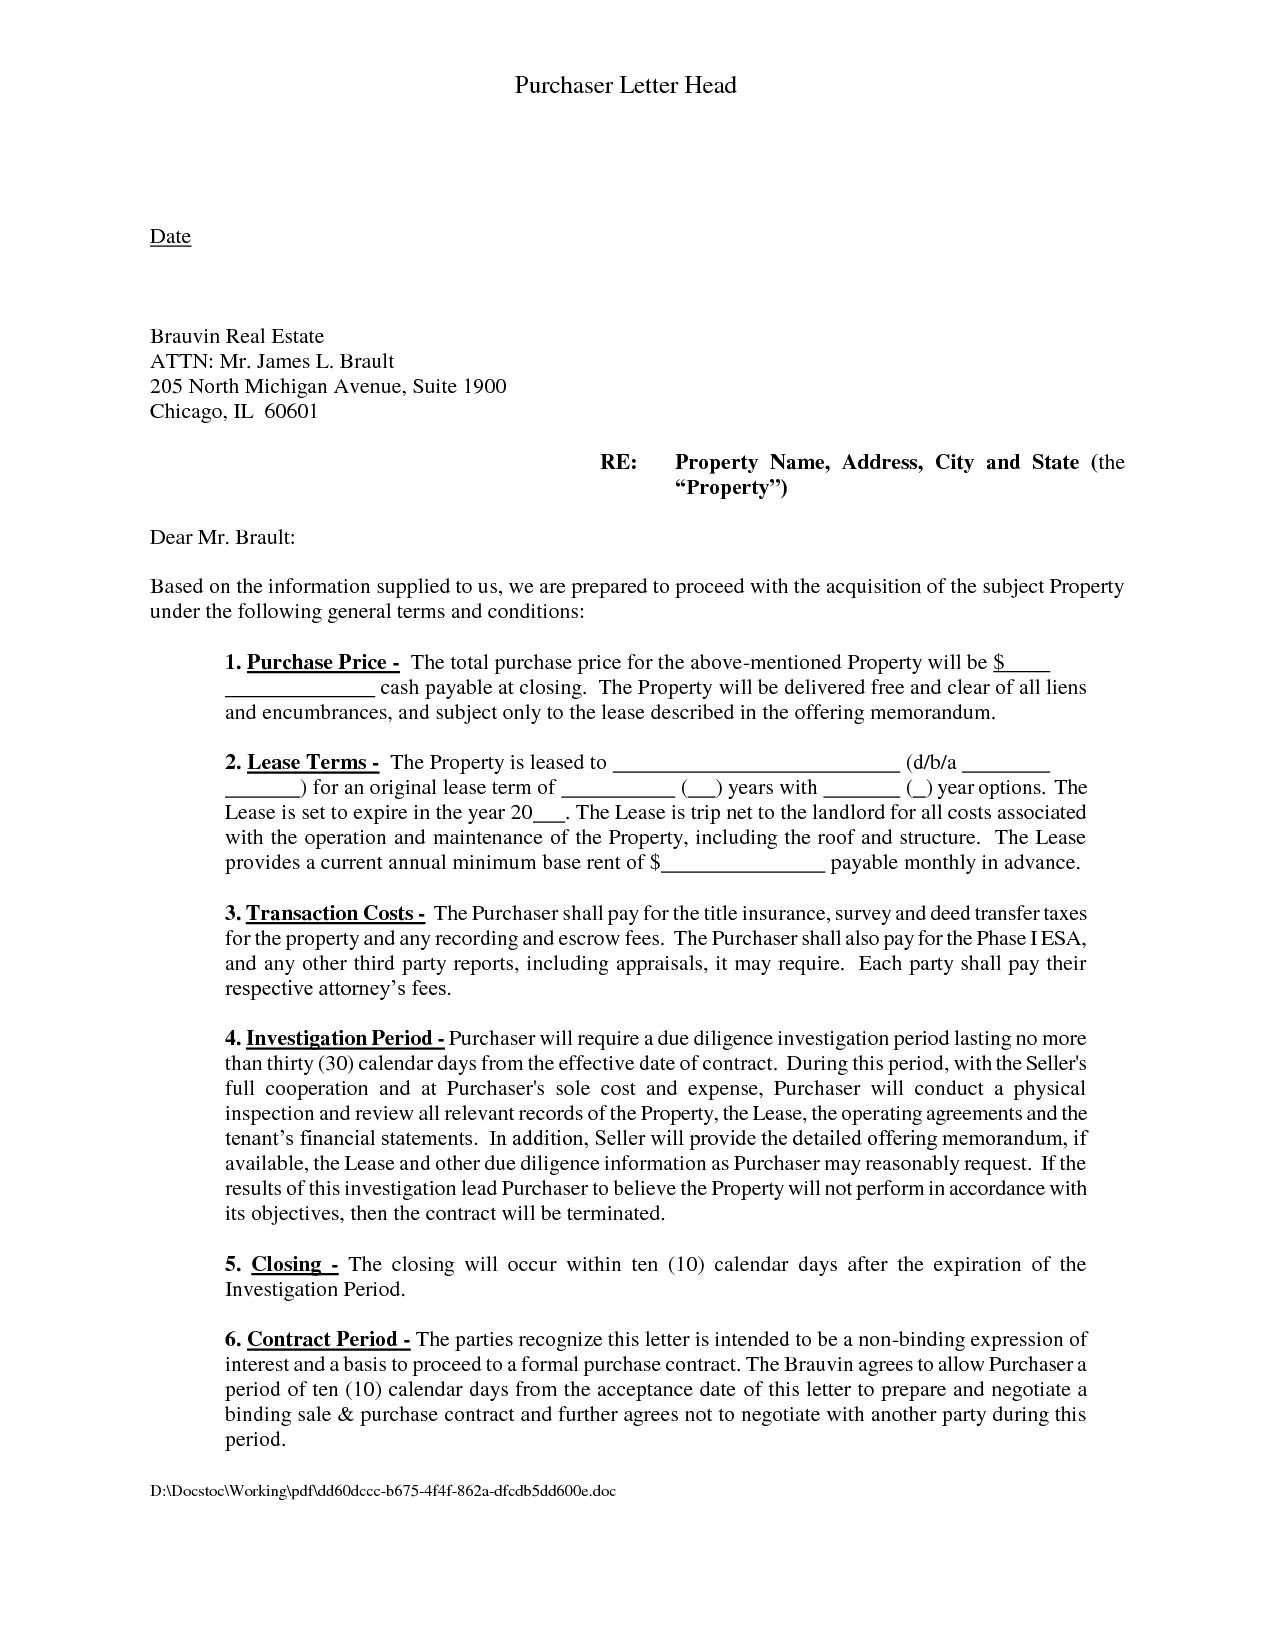 Real Estate Letter Of Intent Template - Mercial Letter Intent Template to Lease Space Real Estate